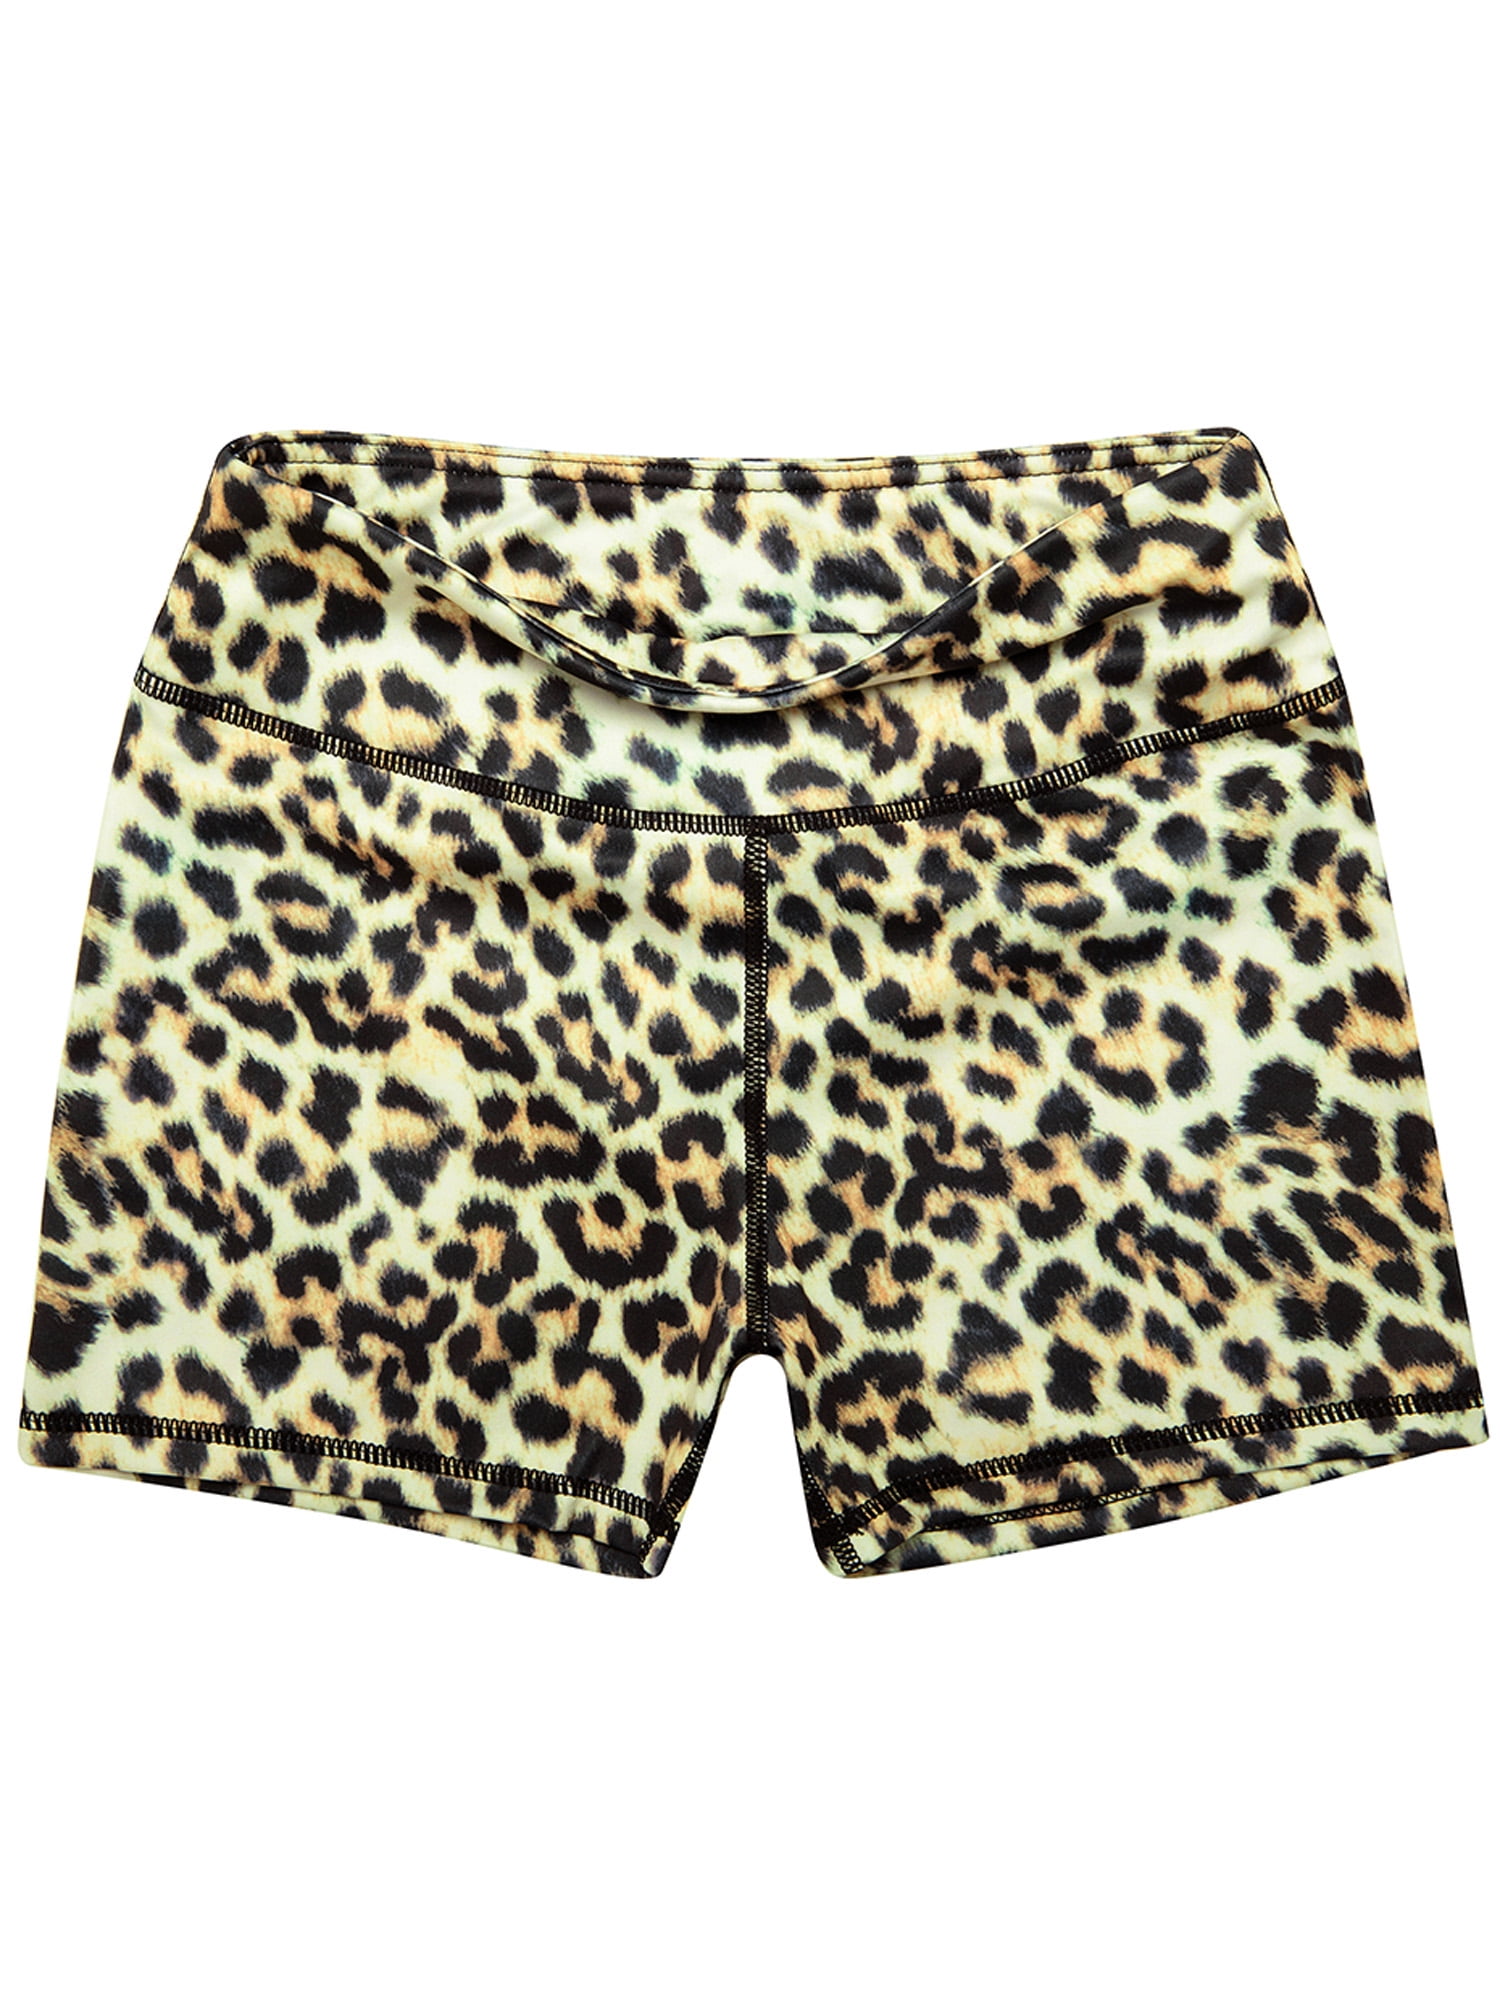  Leopard print workout shorts with Comfort Workout Clothes